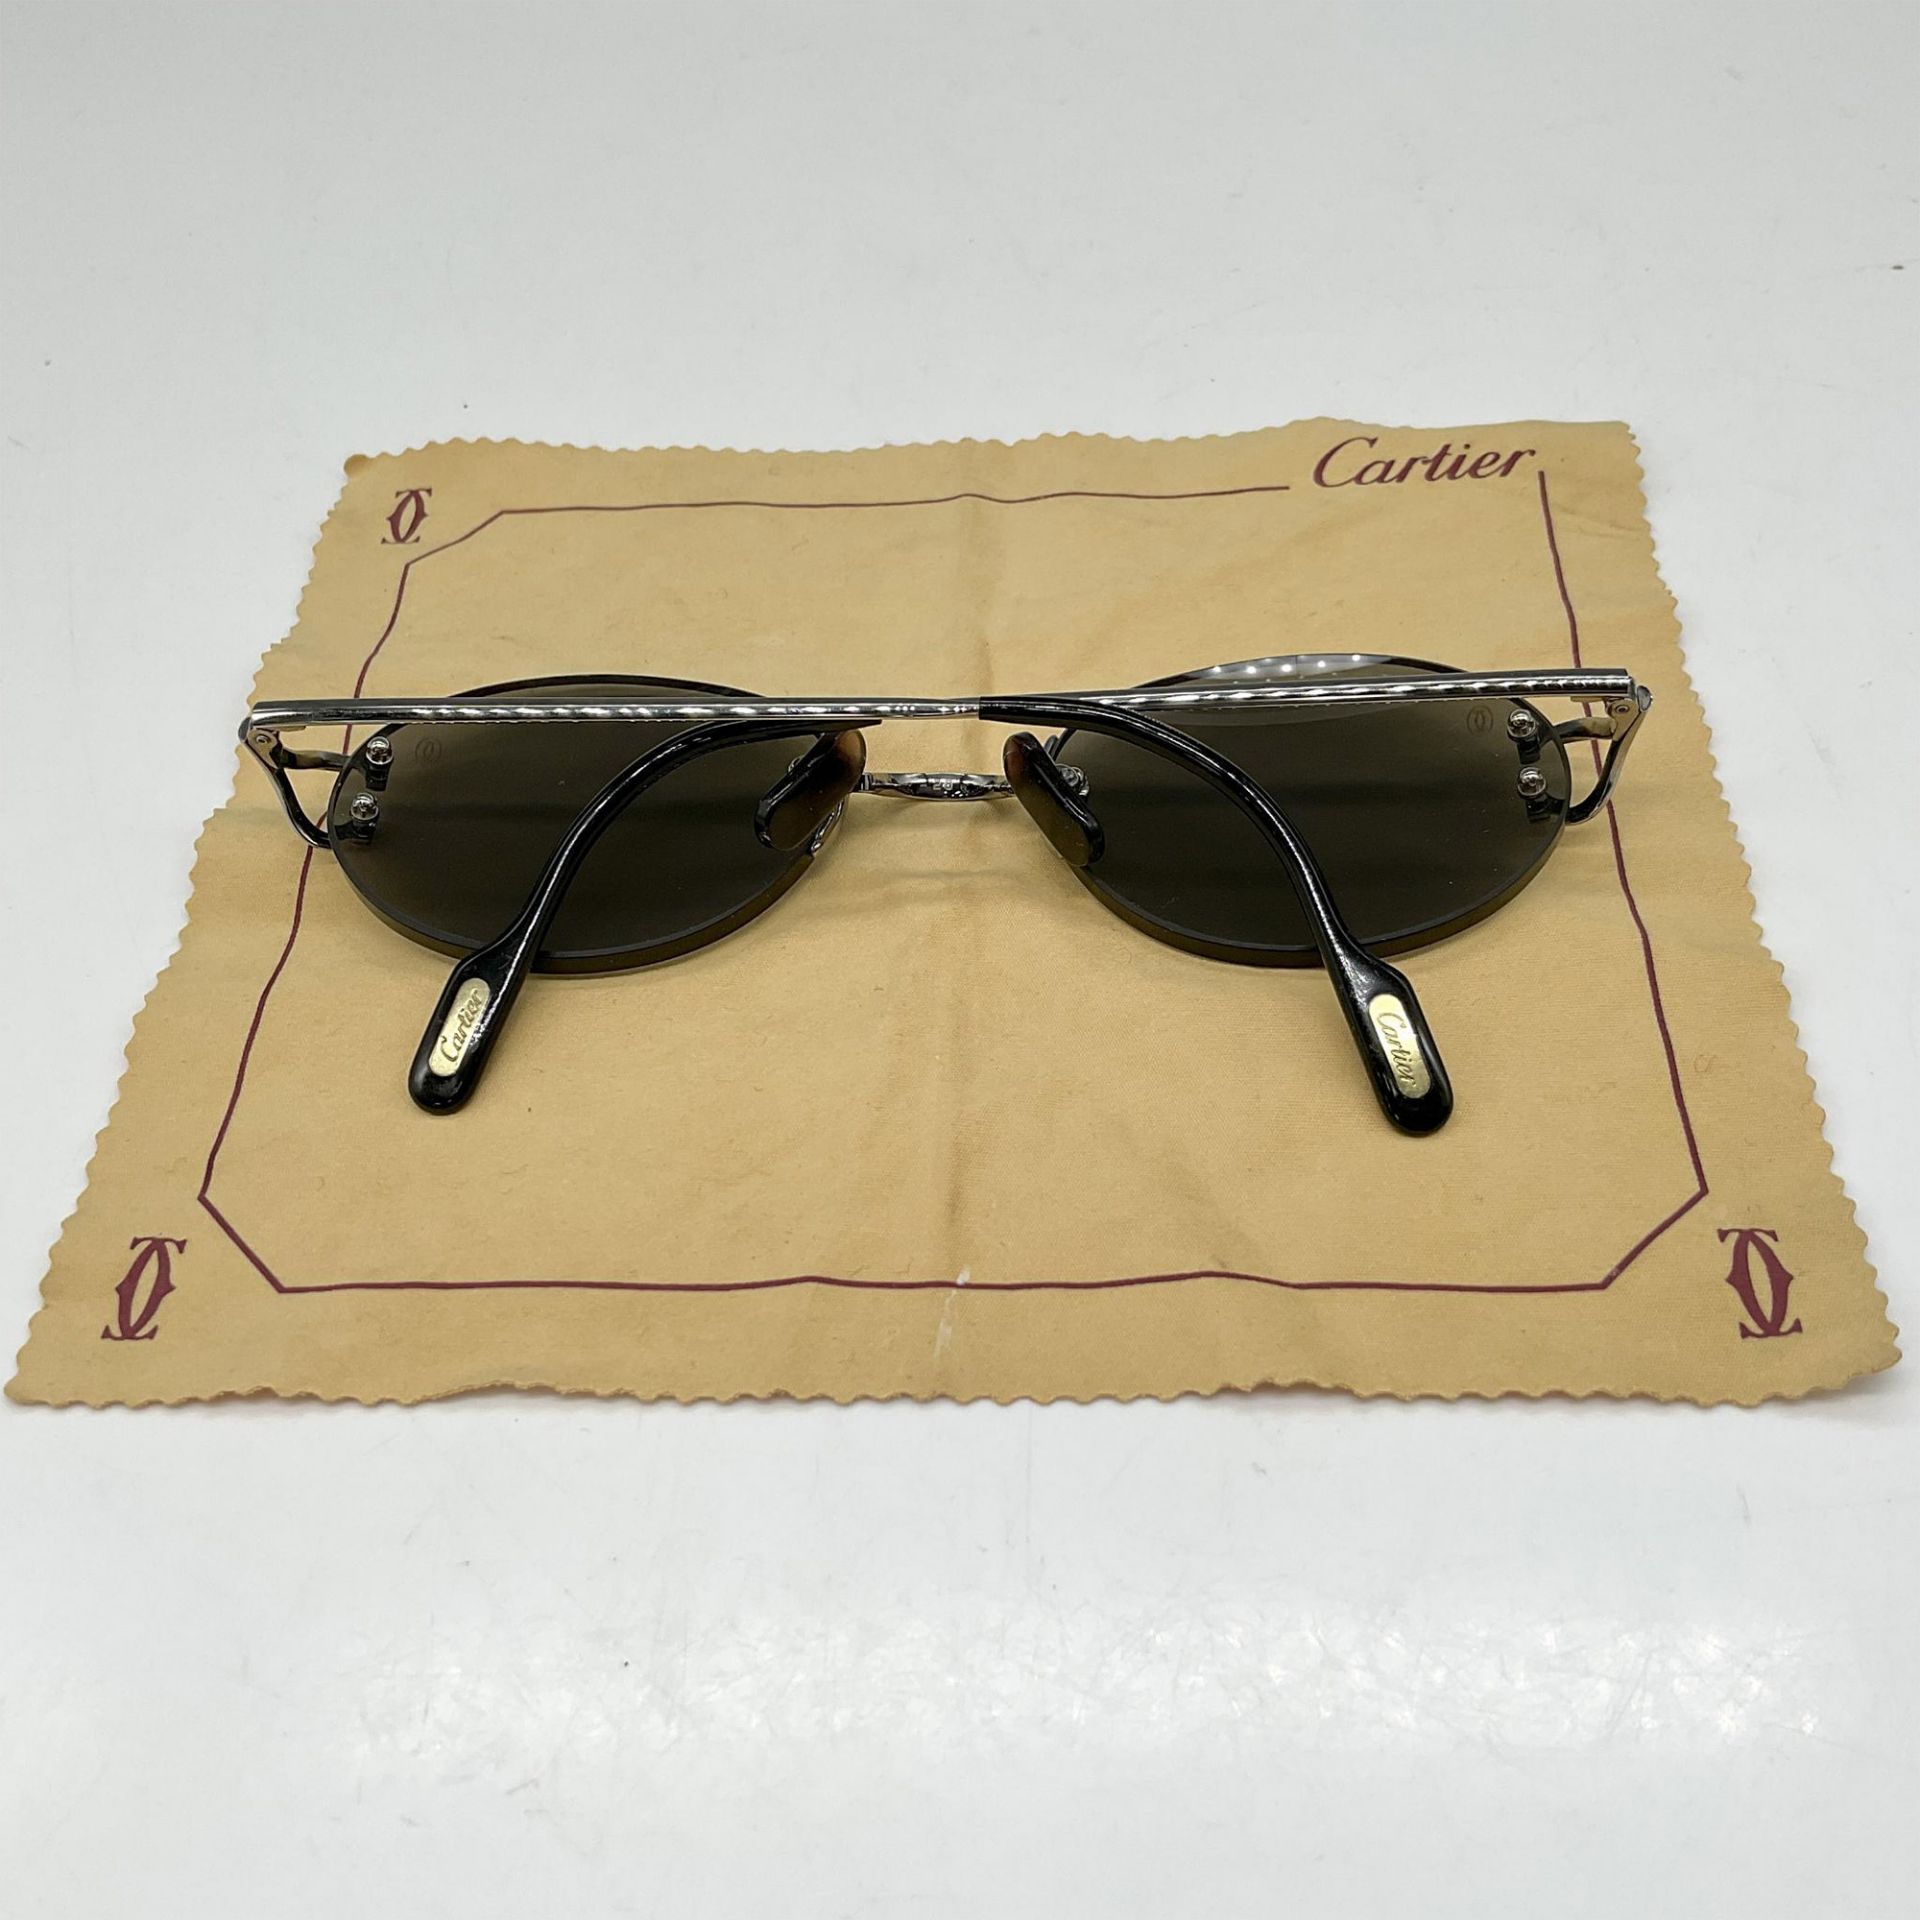 Cartier Scala Rimless Sunglasses with Case - Image 4 of 5